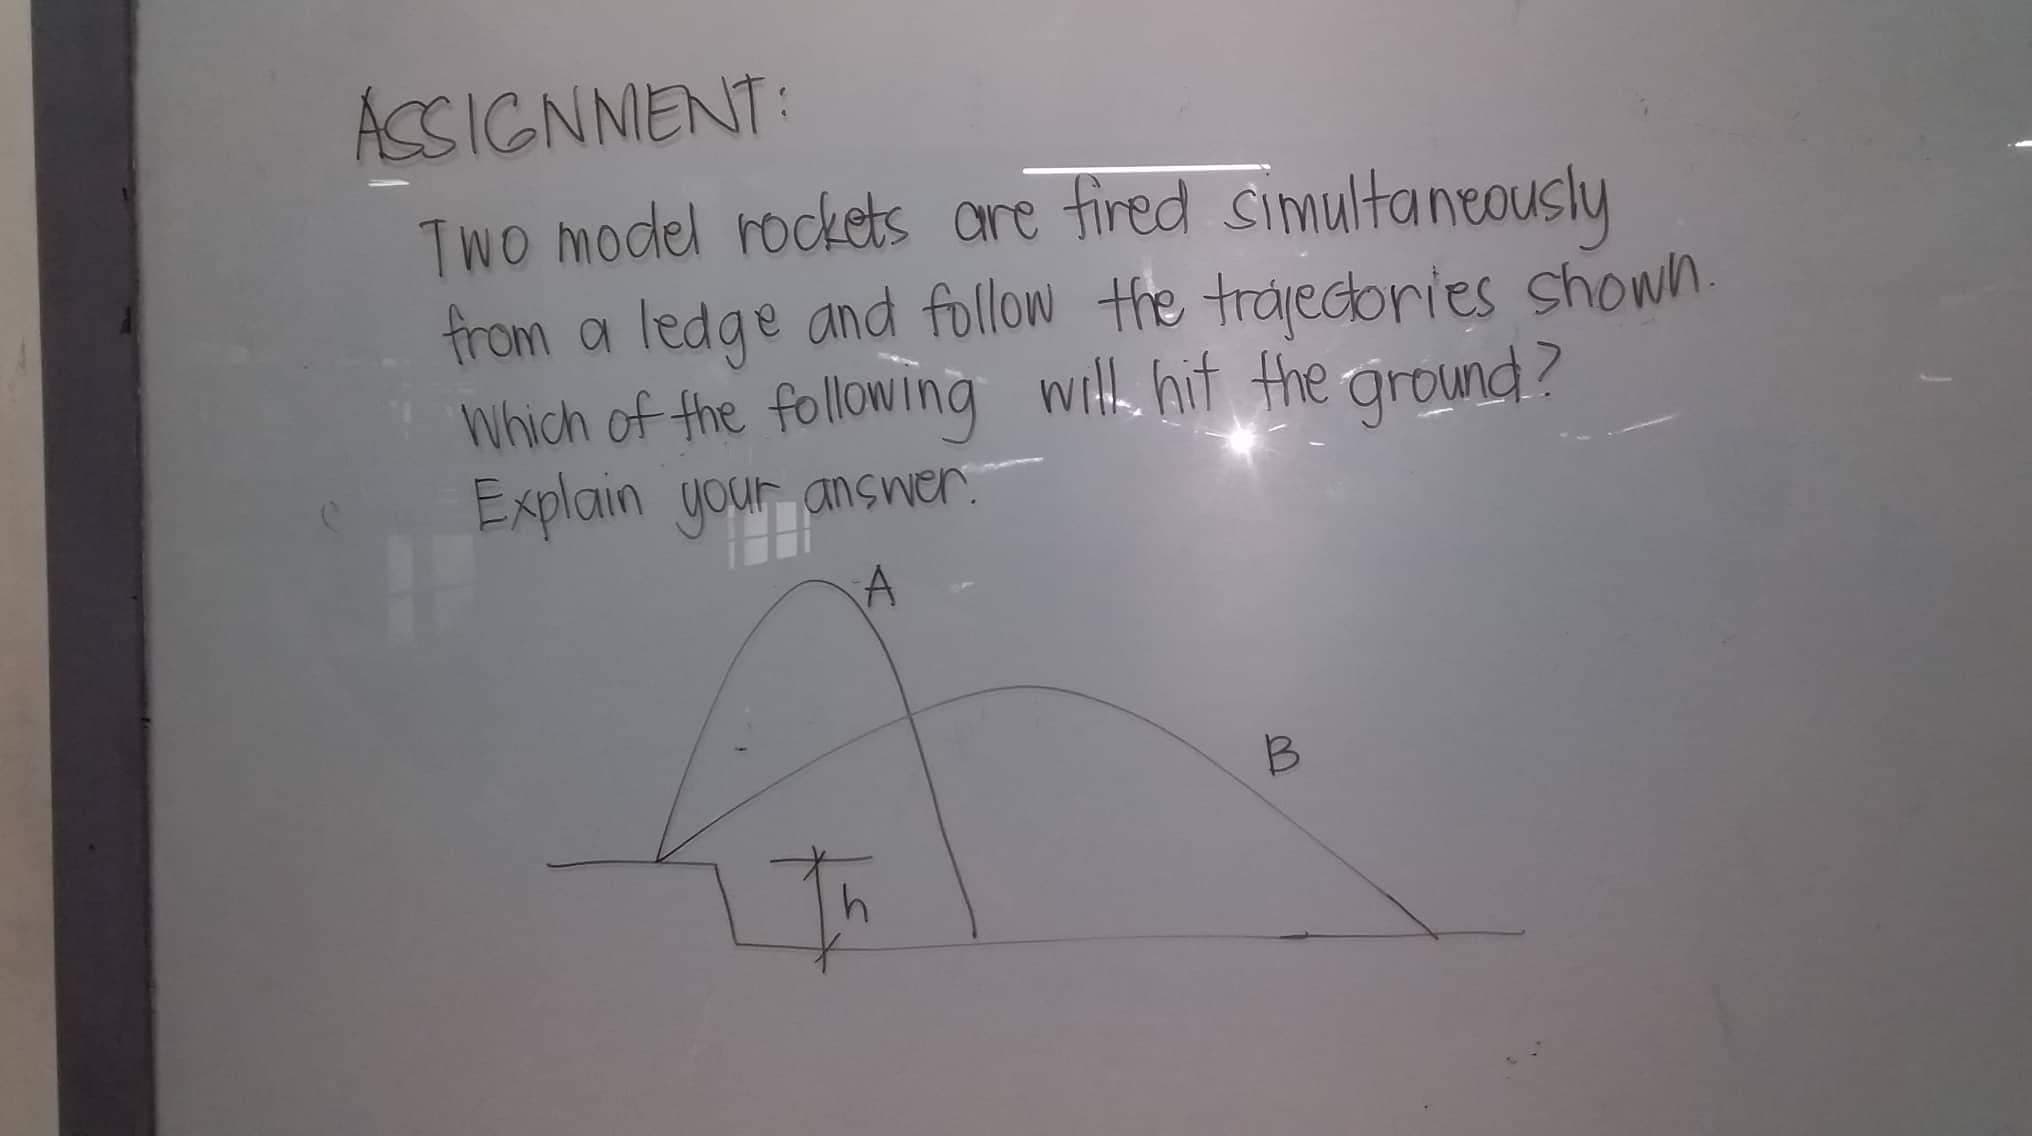 ACSIGNNENT:
TwO model rockets ore fired simultaneously
from a ledge and follow the trajecories shown.
Which of the following with hit the ground?
Explain your answer.
